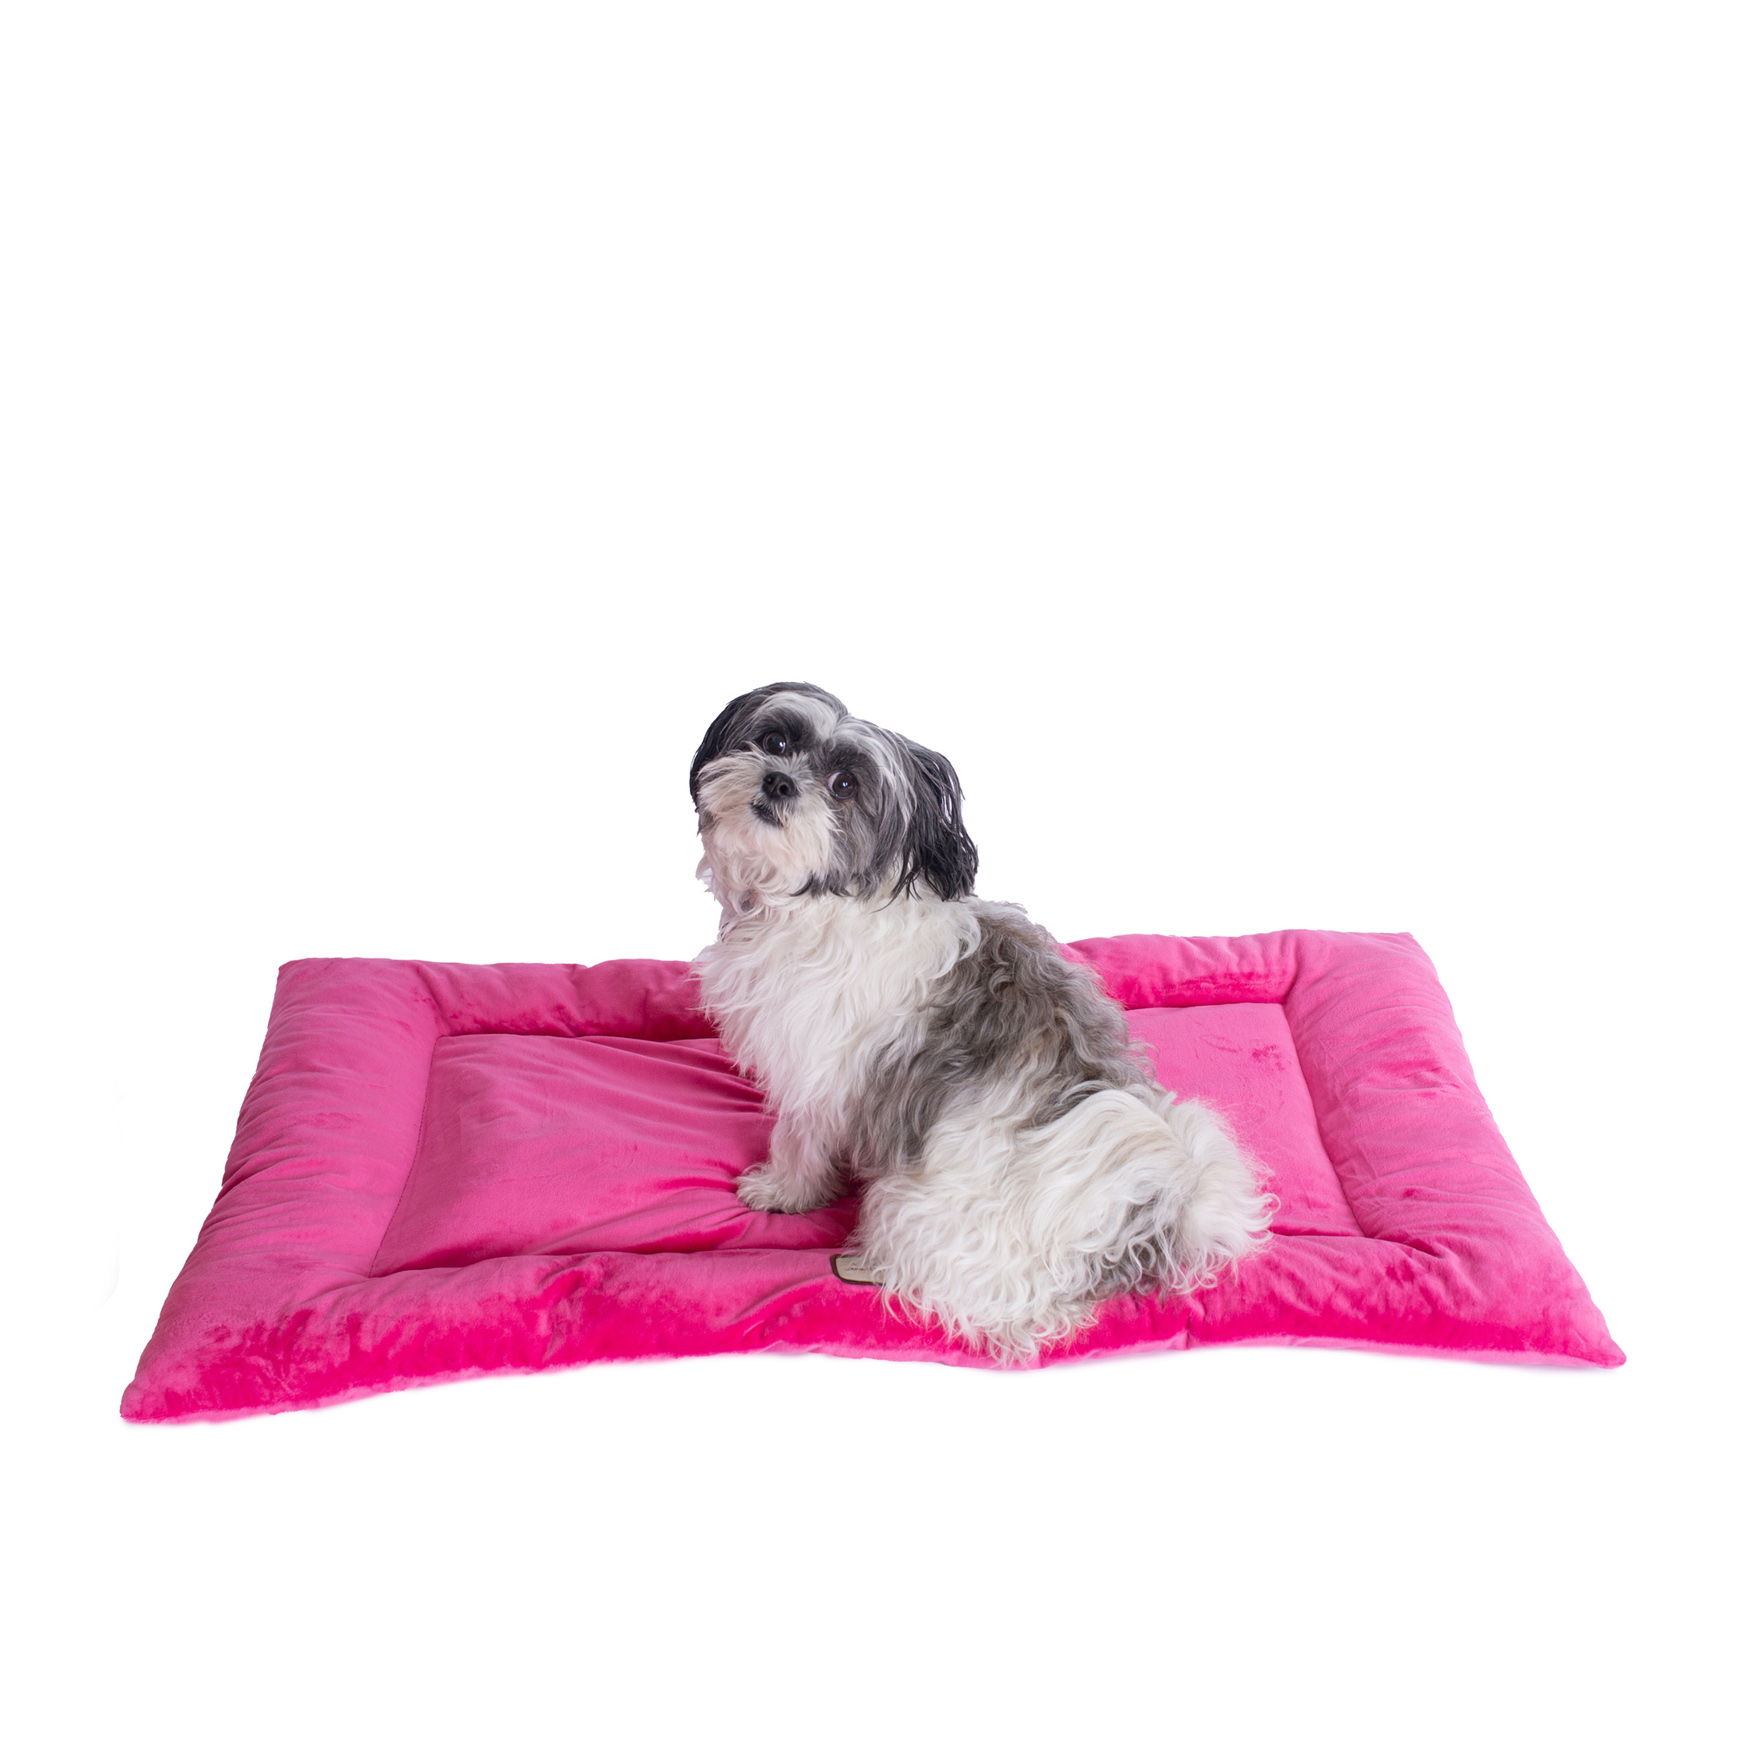 Medium Pet Bed Mat , Dog Crate Soft Pad With Poly Fill Cushion, PINK